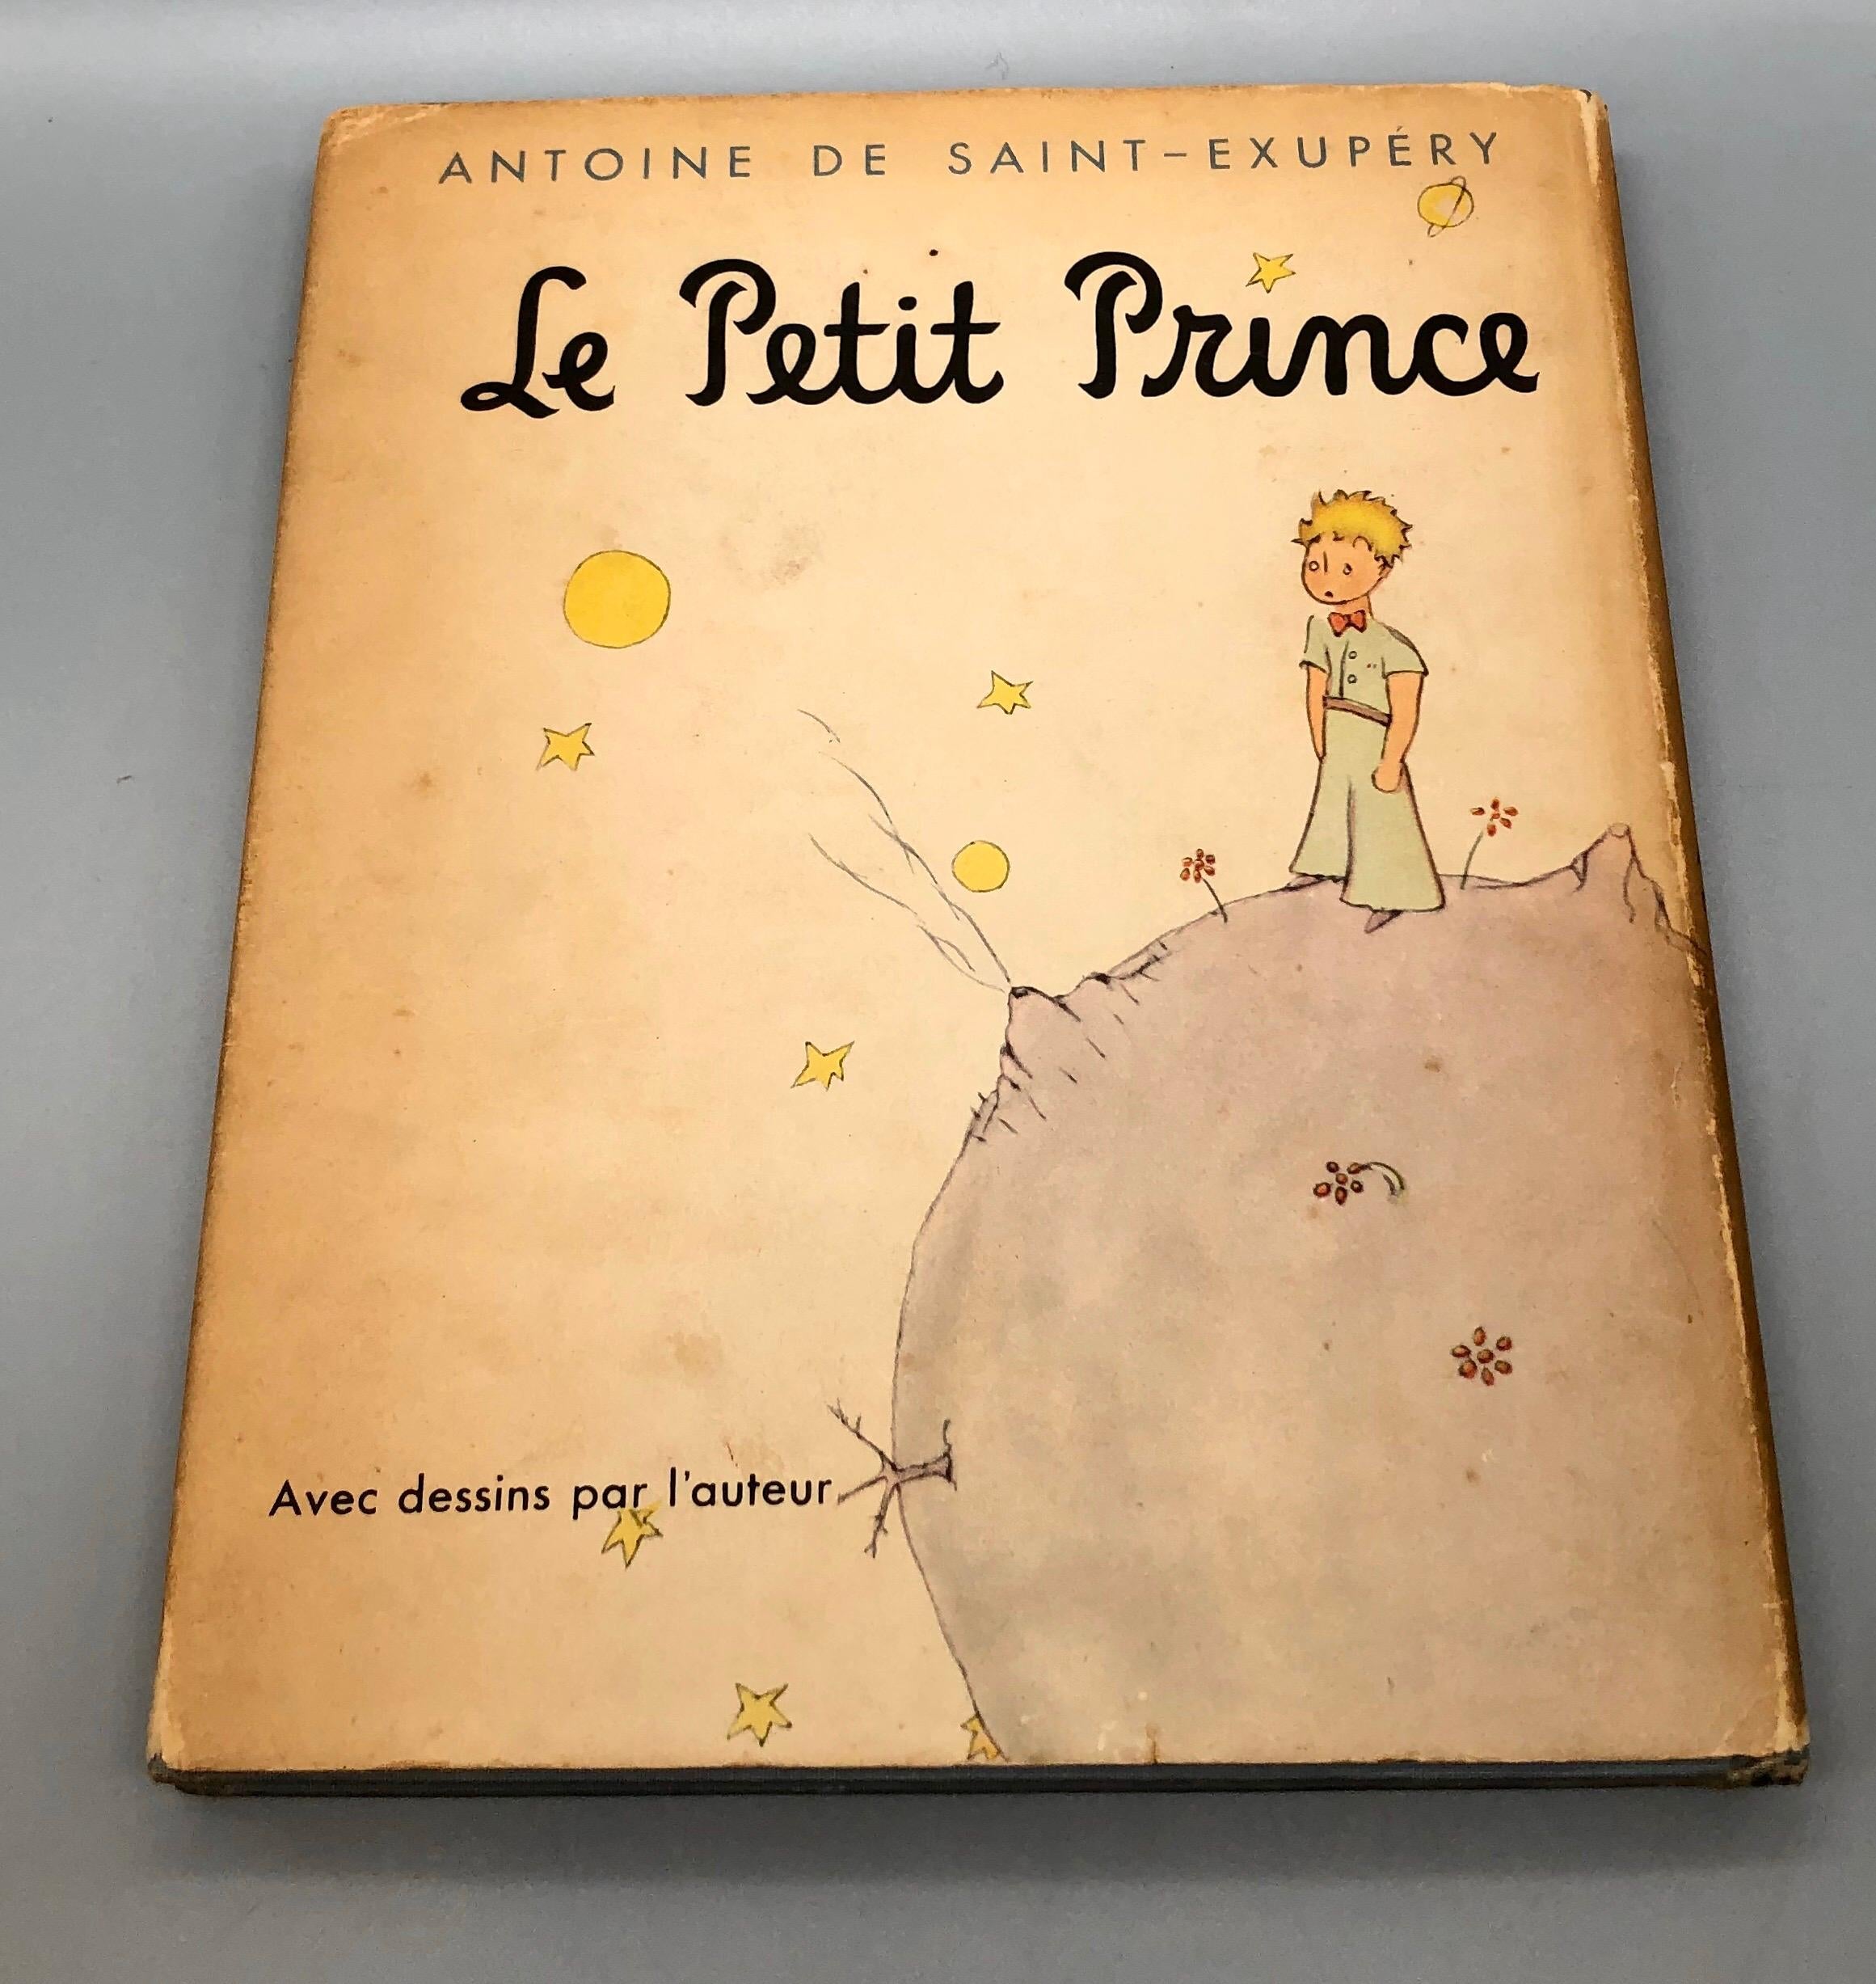 A very hard to find 1943 French edition of the childhood classic The Little Prince, published by Reynal & Hitchcock, New York, 1943. This is a second edition and includes dustjacket. The hardcover book is bound in blue-grey cloth and stamped